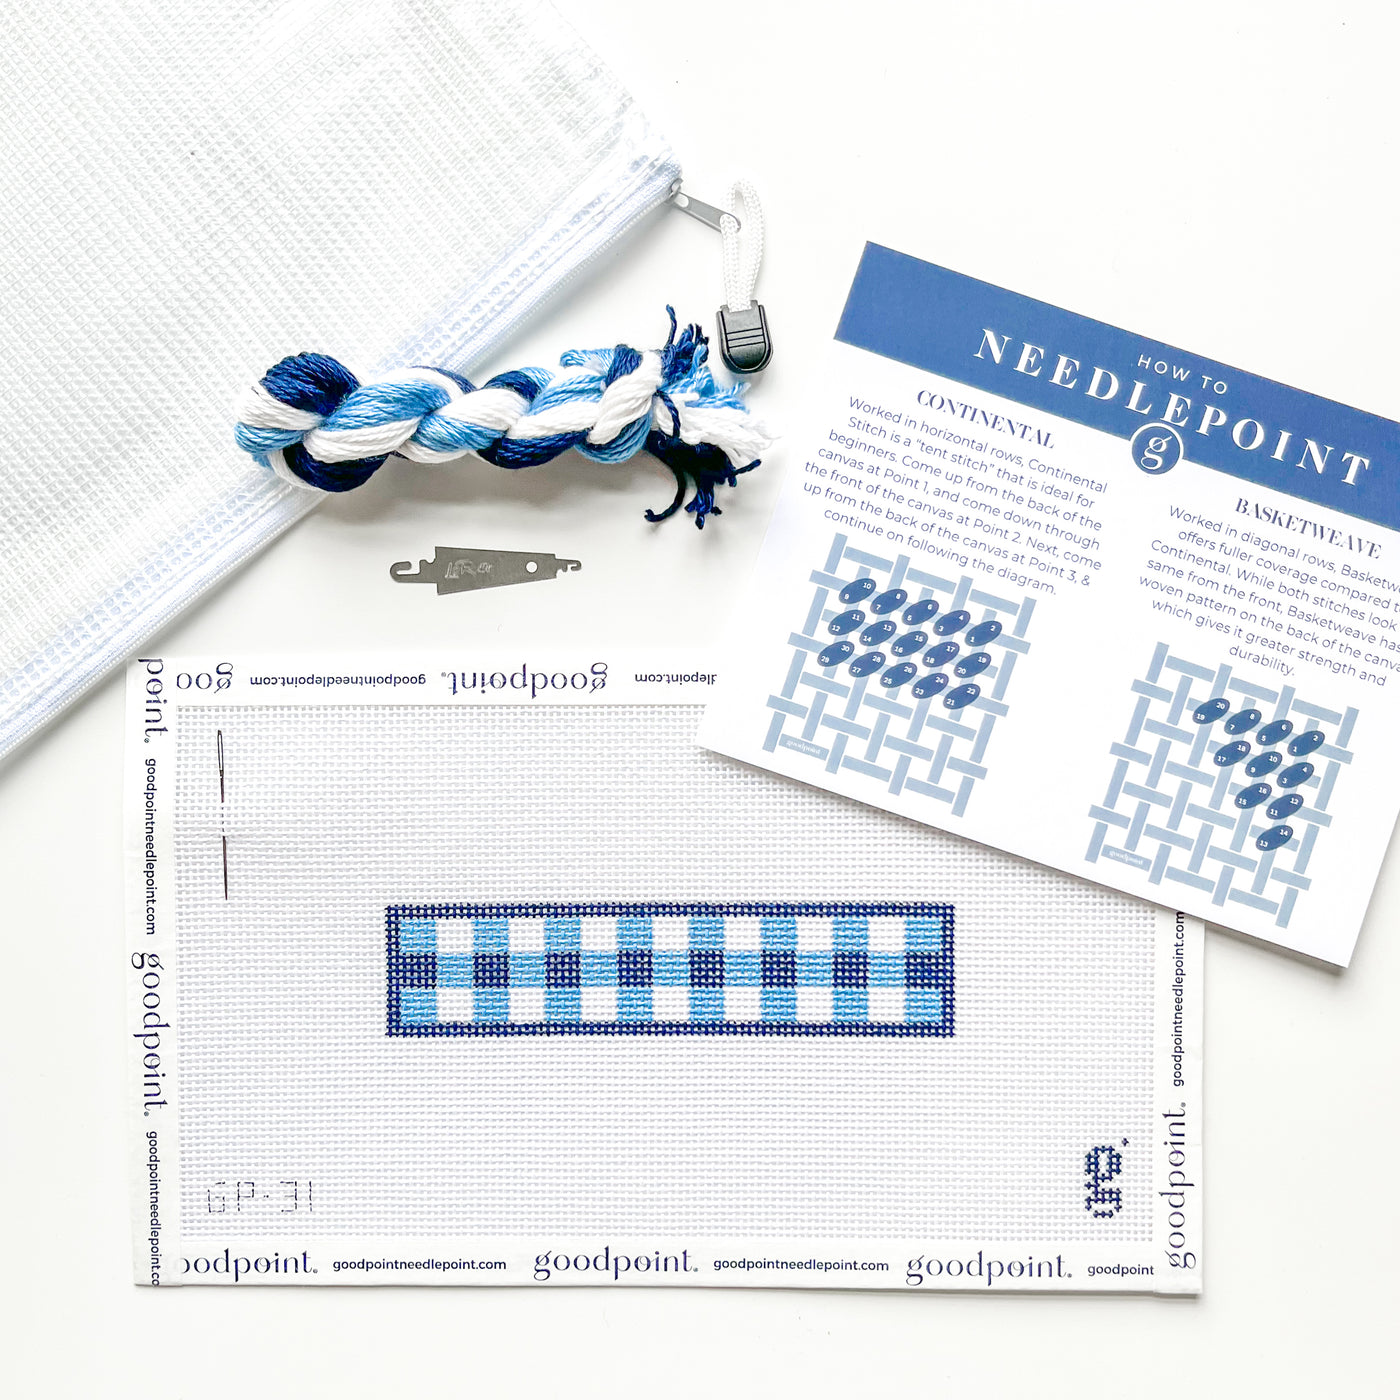 Blue gingham key fob needlepoint canvas sits on white surface surrounded by needlepoint instructions, a needle threader, a bundle of threads and a white project bag